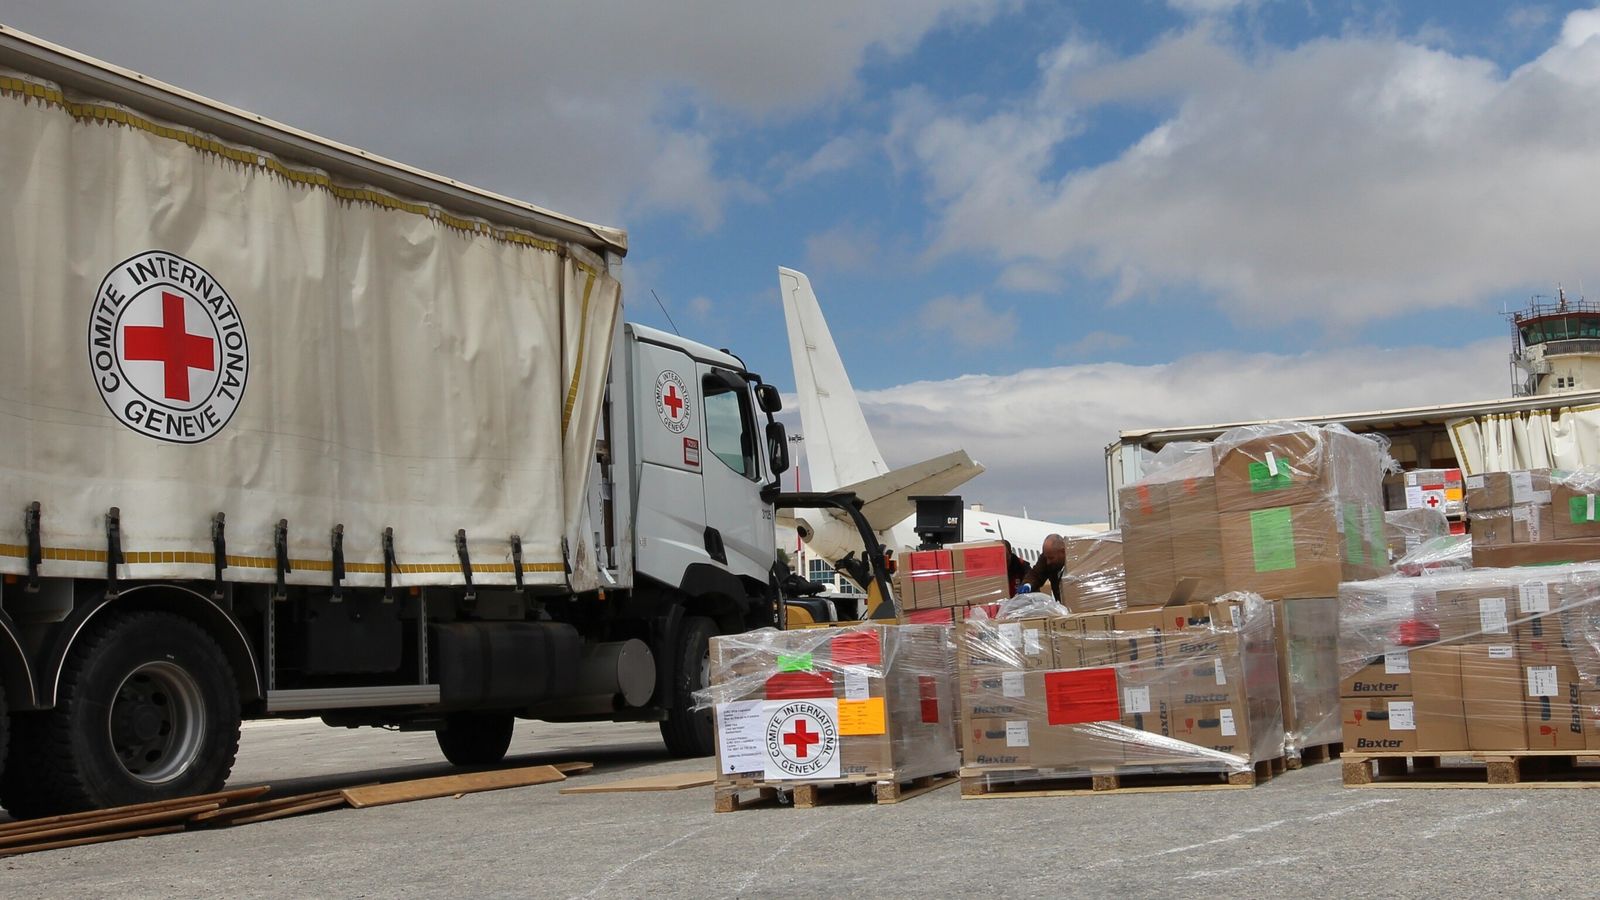 Sudan conflict: First humanitarian aid shipment arrives in Port Sudan